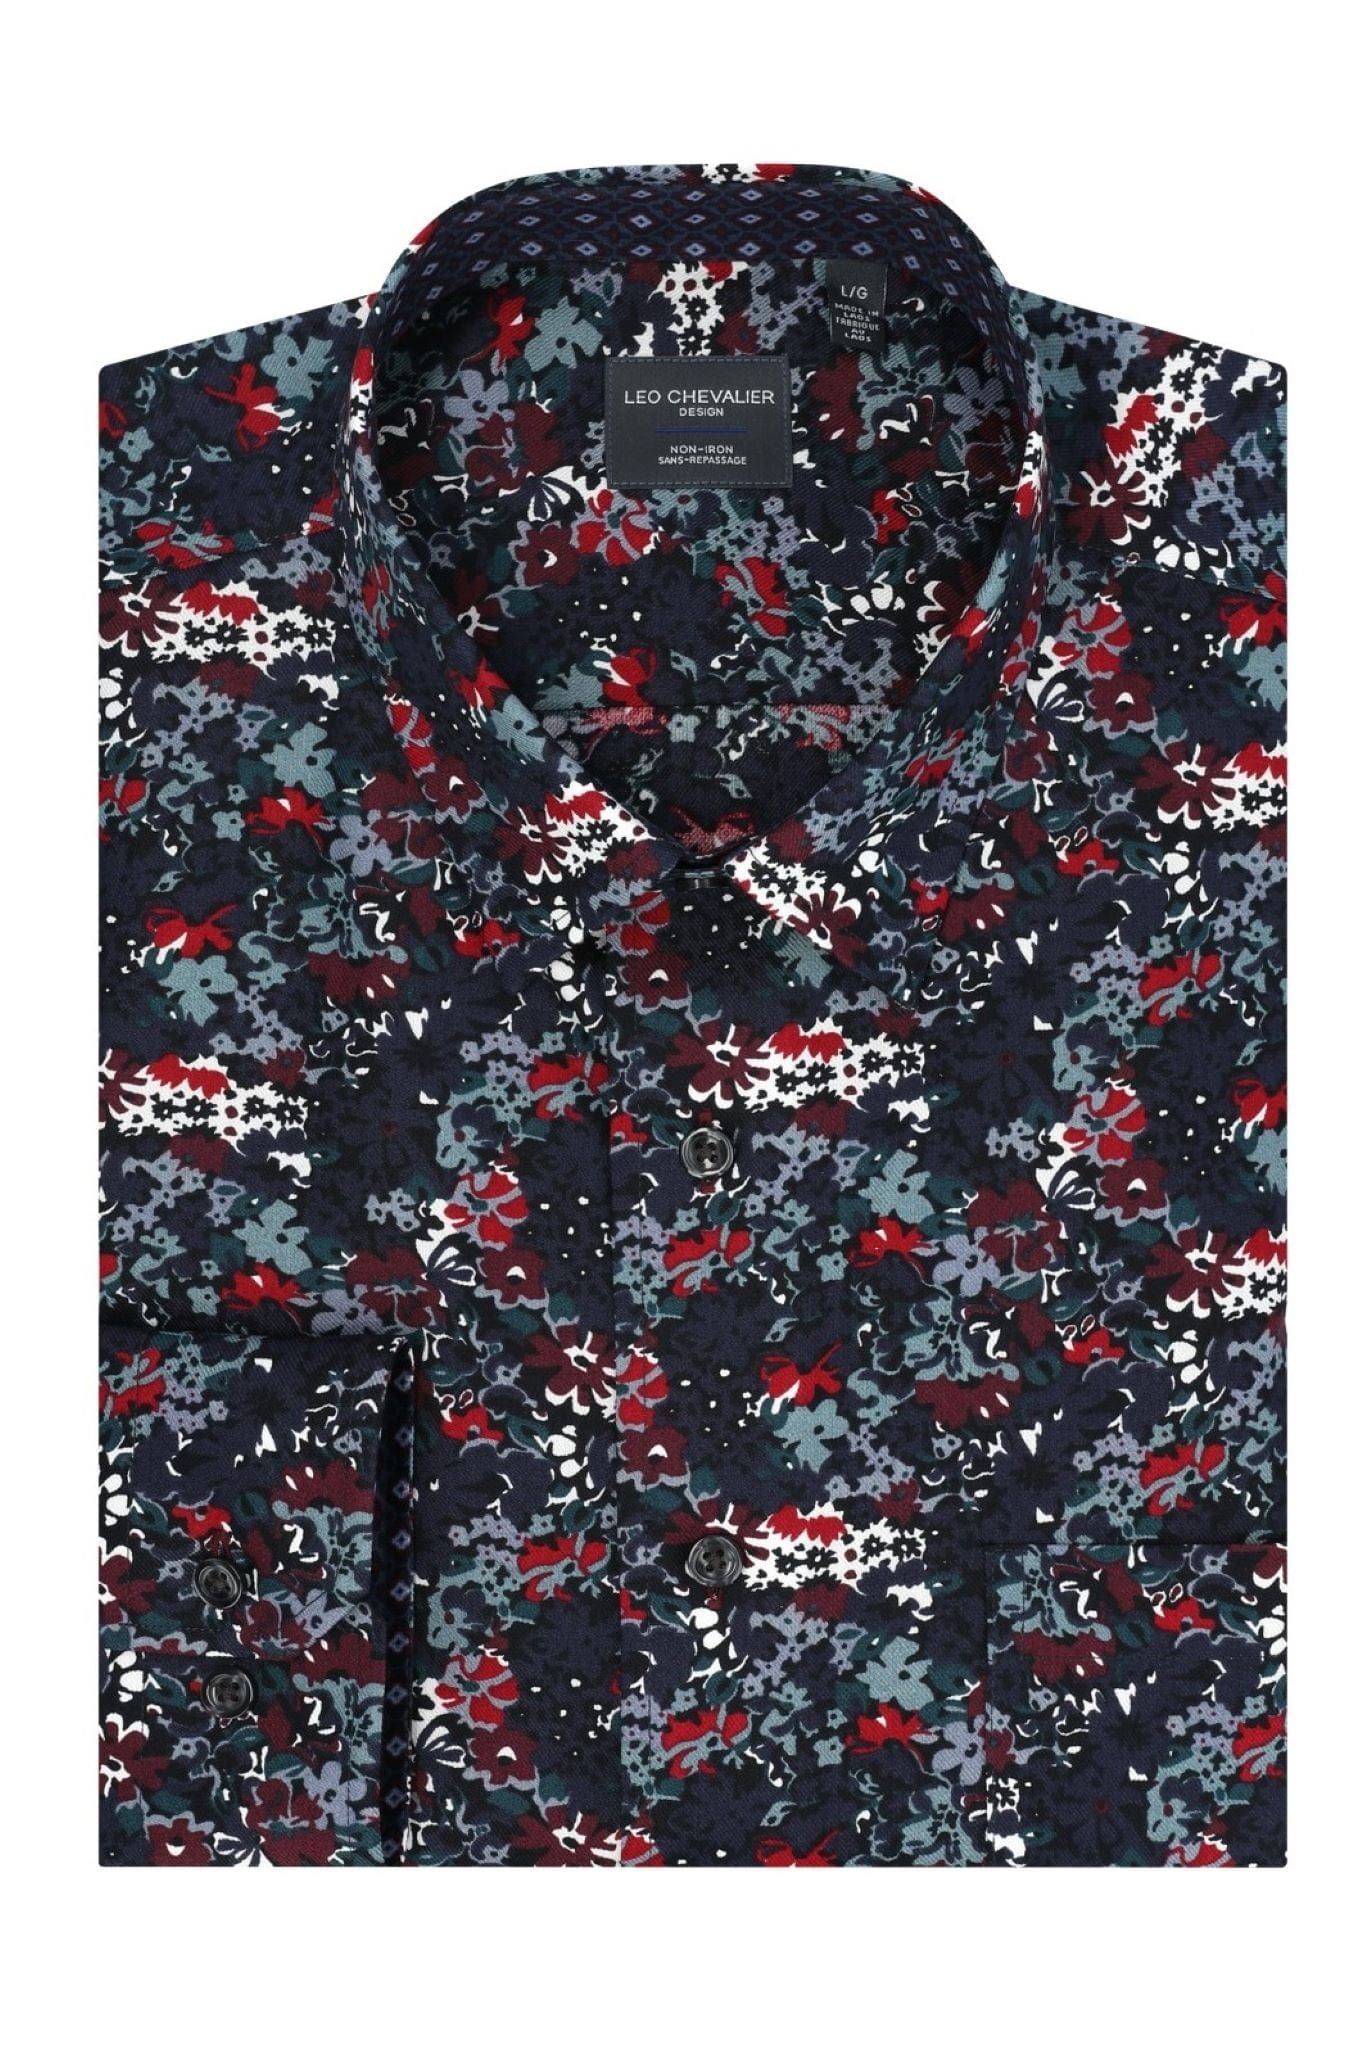 Leo Chevalier Design Elevate Your Style With One Of Our Multi Colored Modern Print Shirts